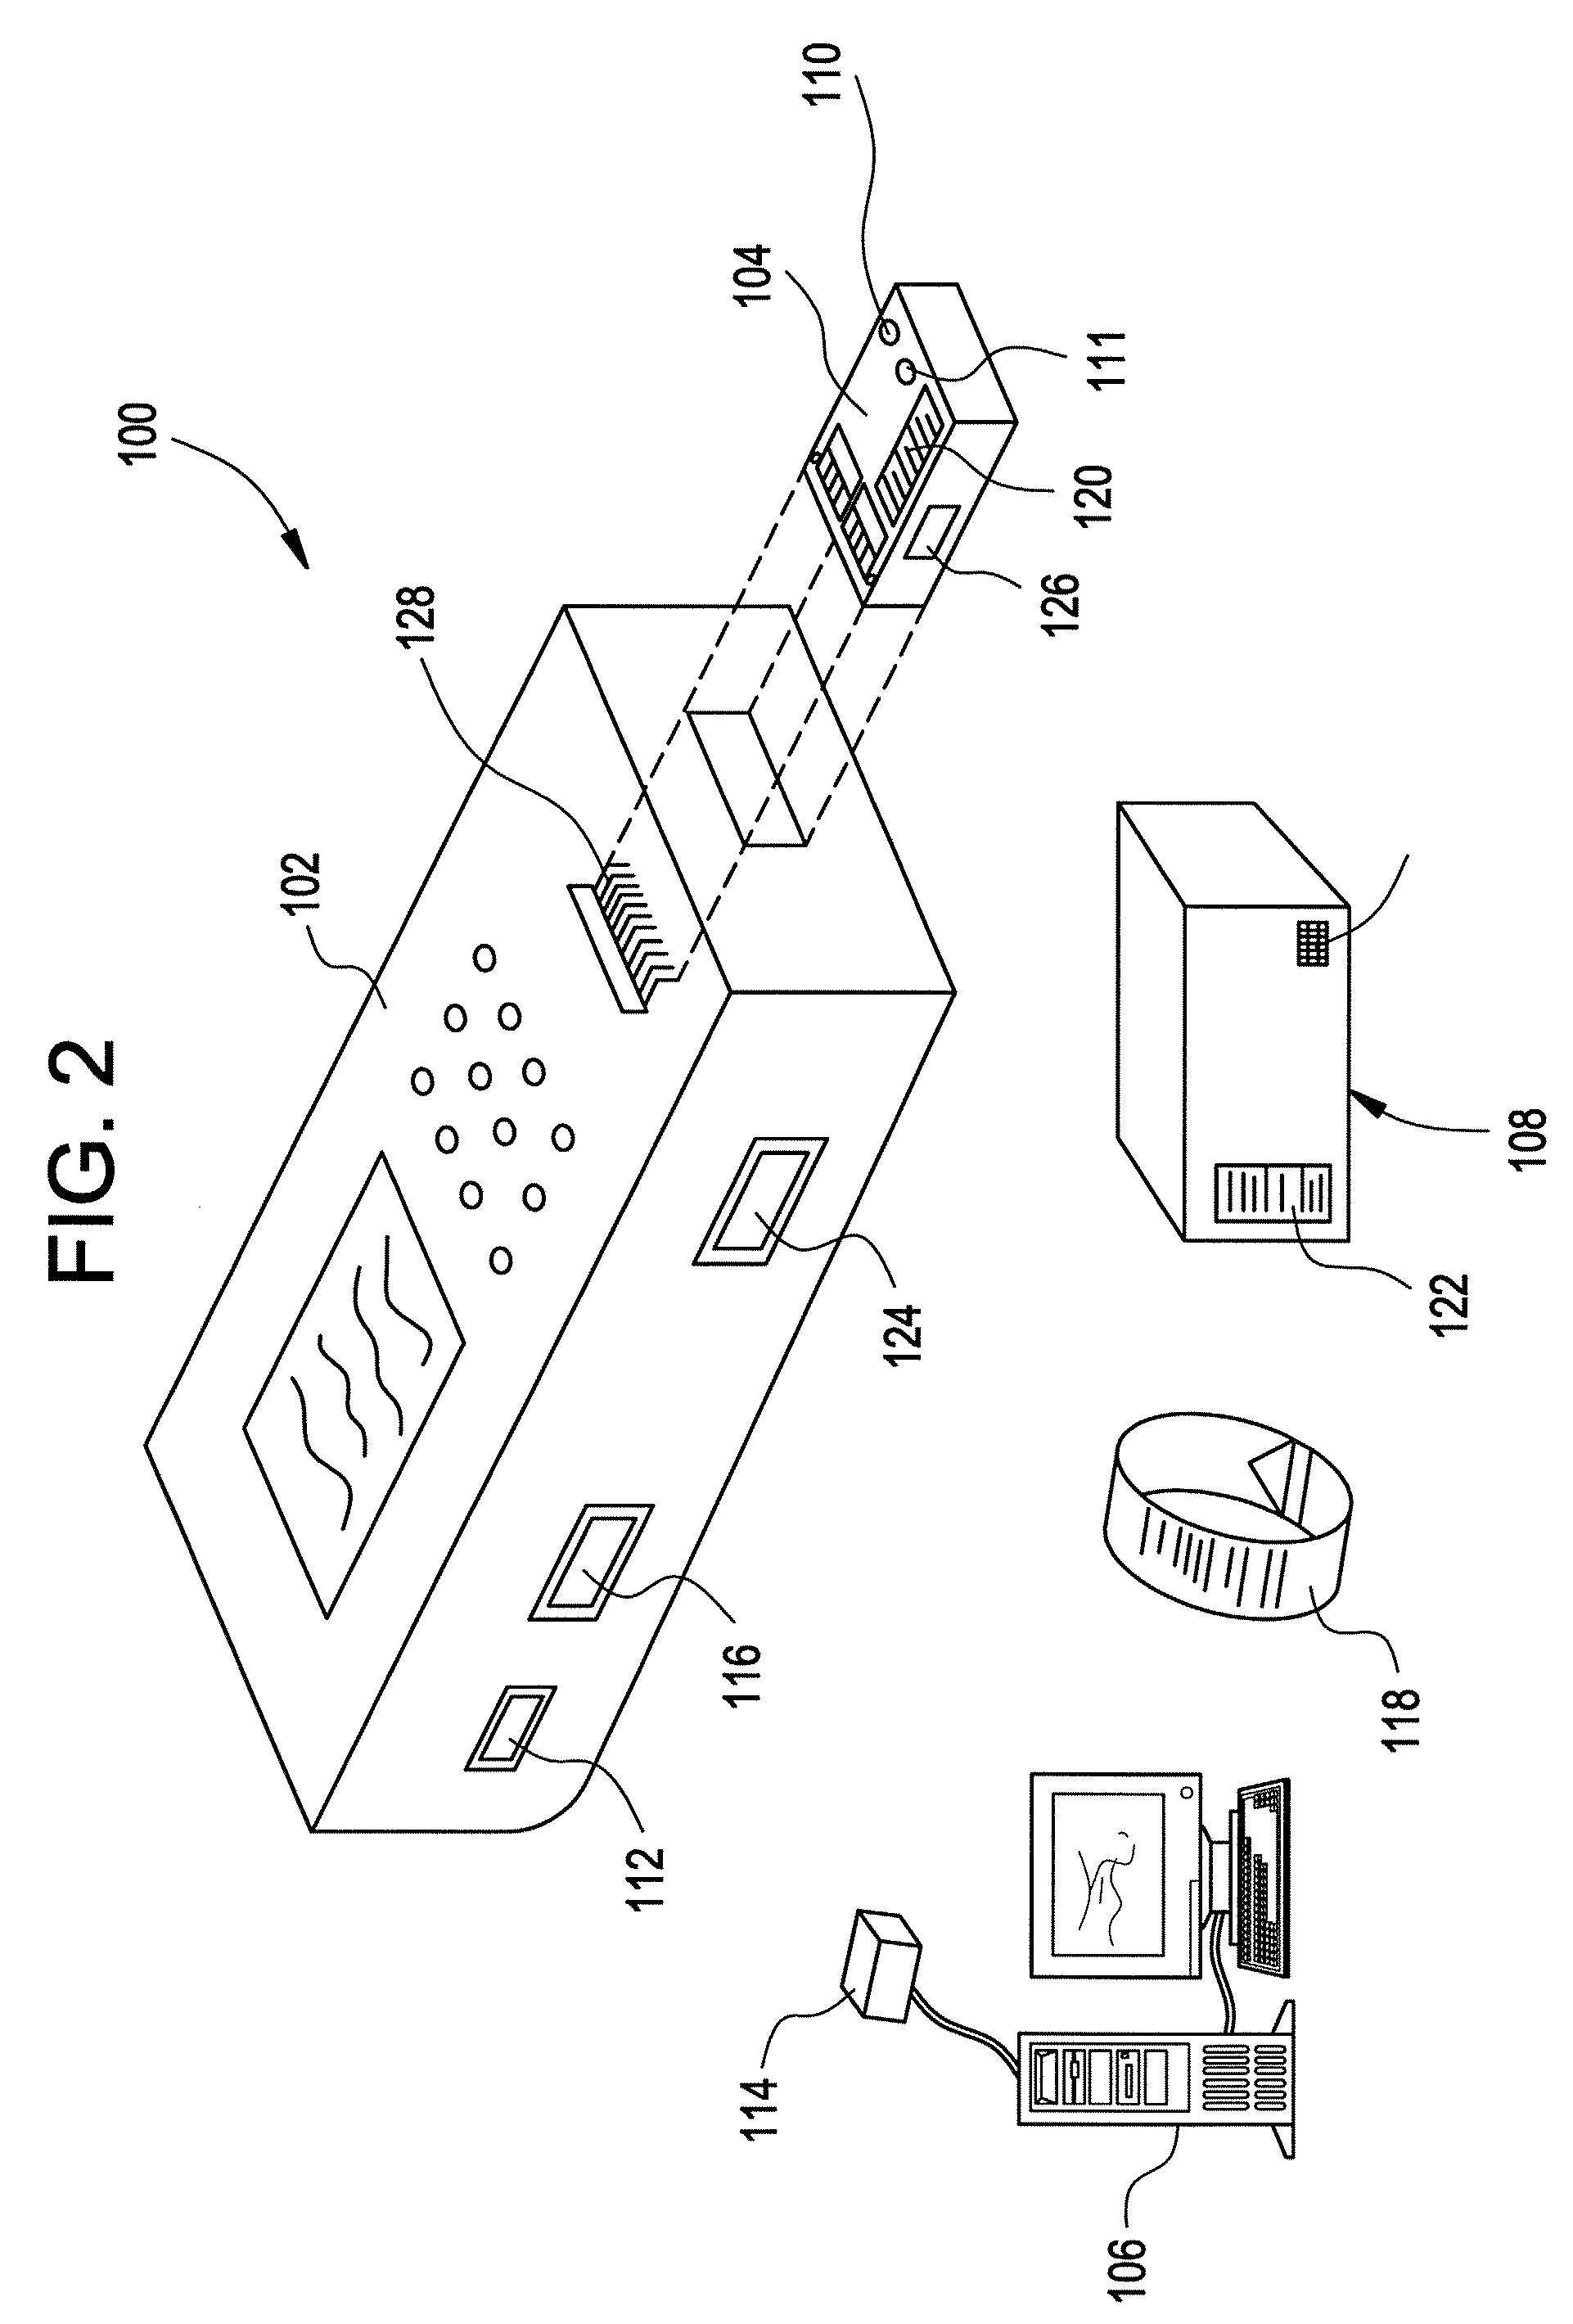 Point-of-care inventory management system and method